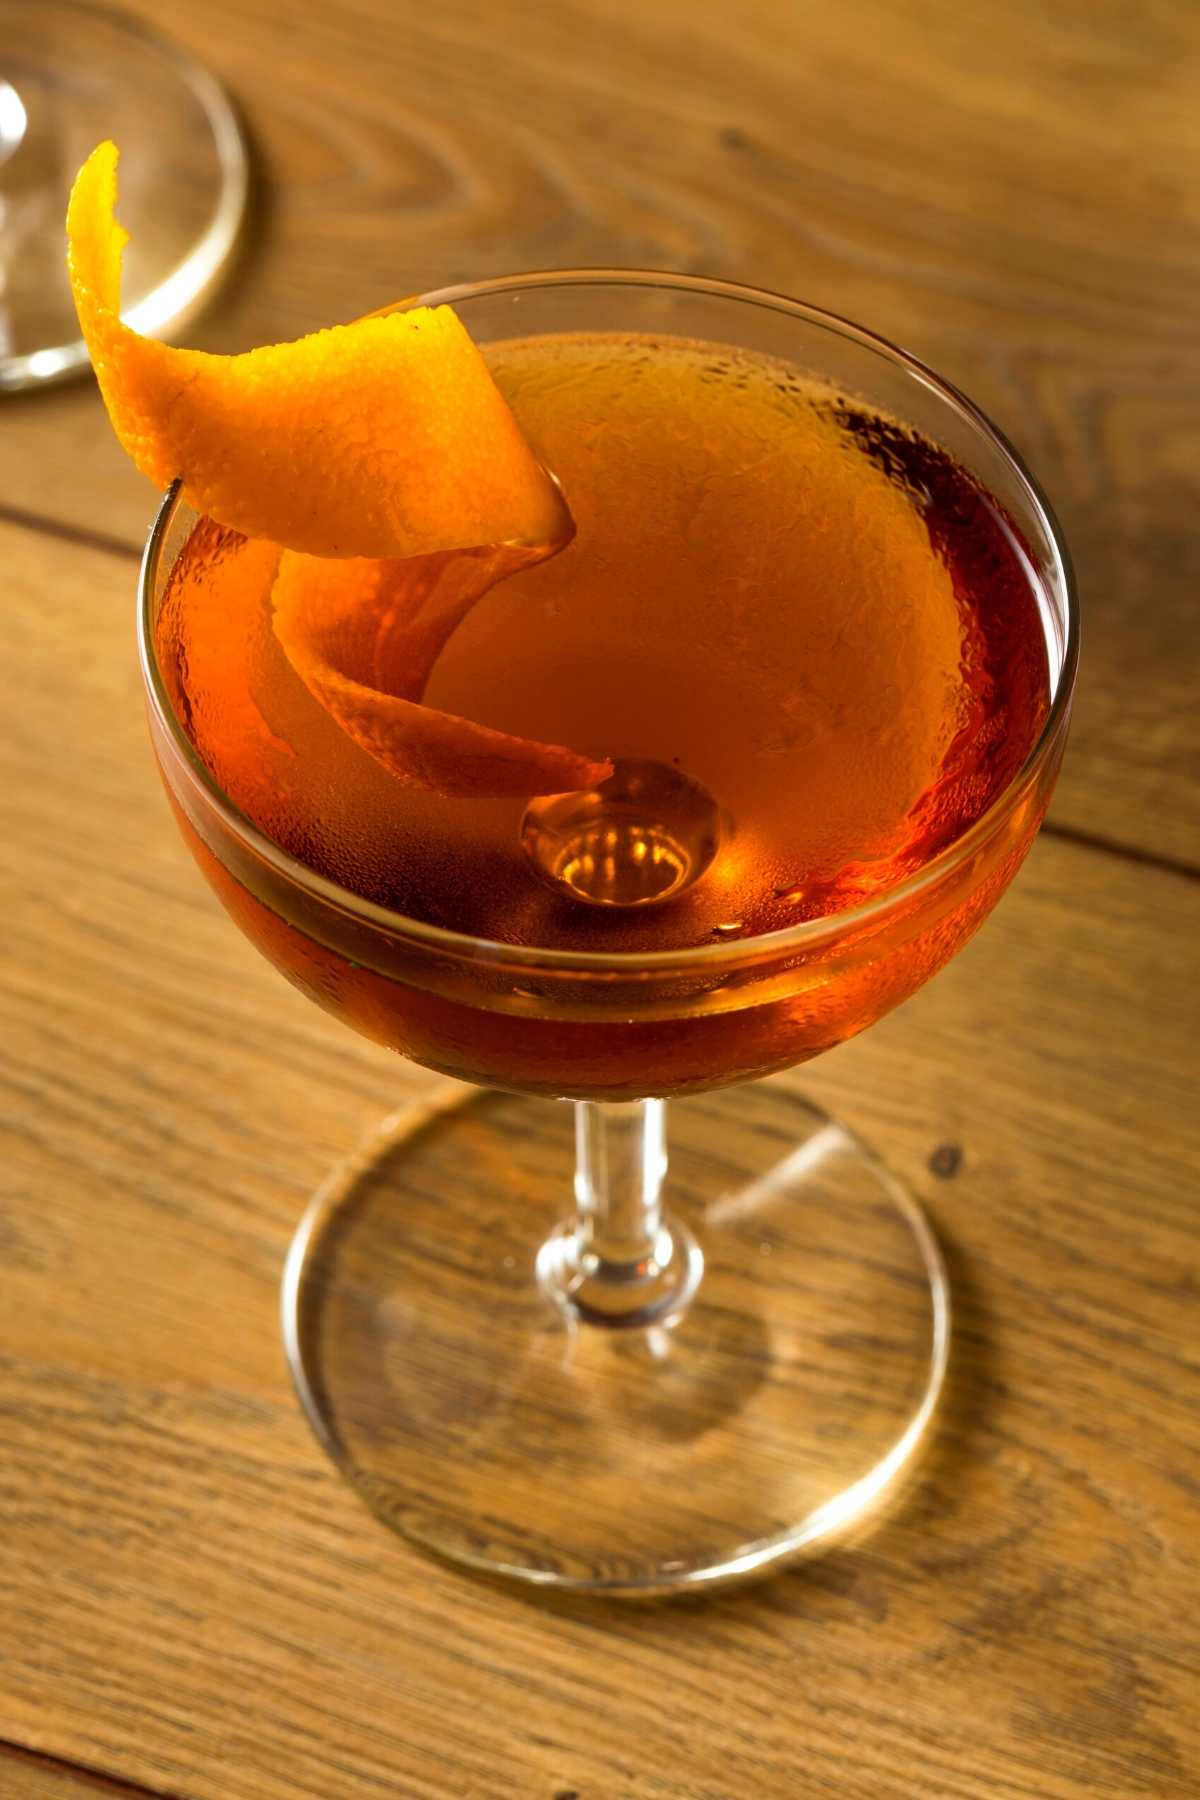 If you went back in time and visited any trendy bar at the turn of the 20th century, you’d be sure to find a Hanky Panky Cocktail on the menu. It’s classic, sophisticated and super easy to recreate at home.